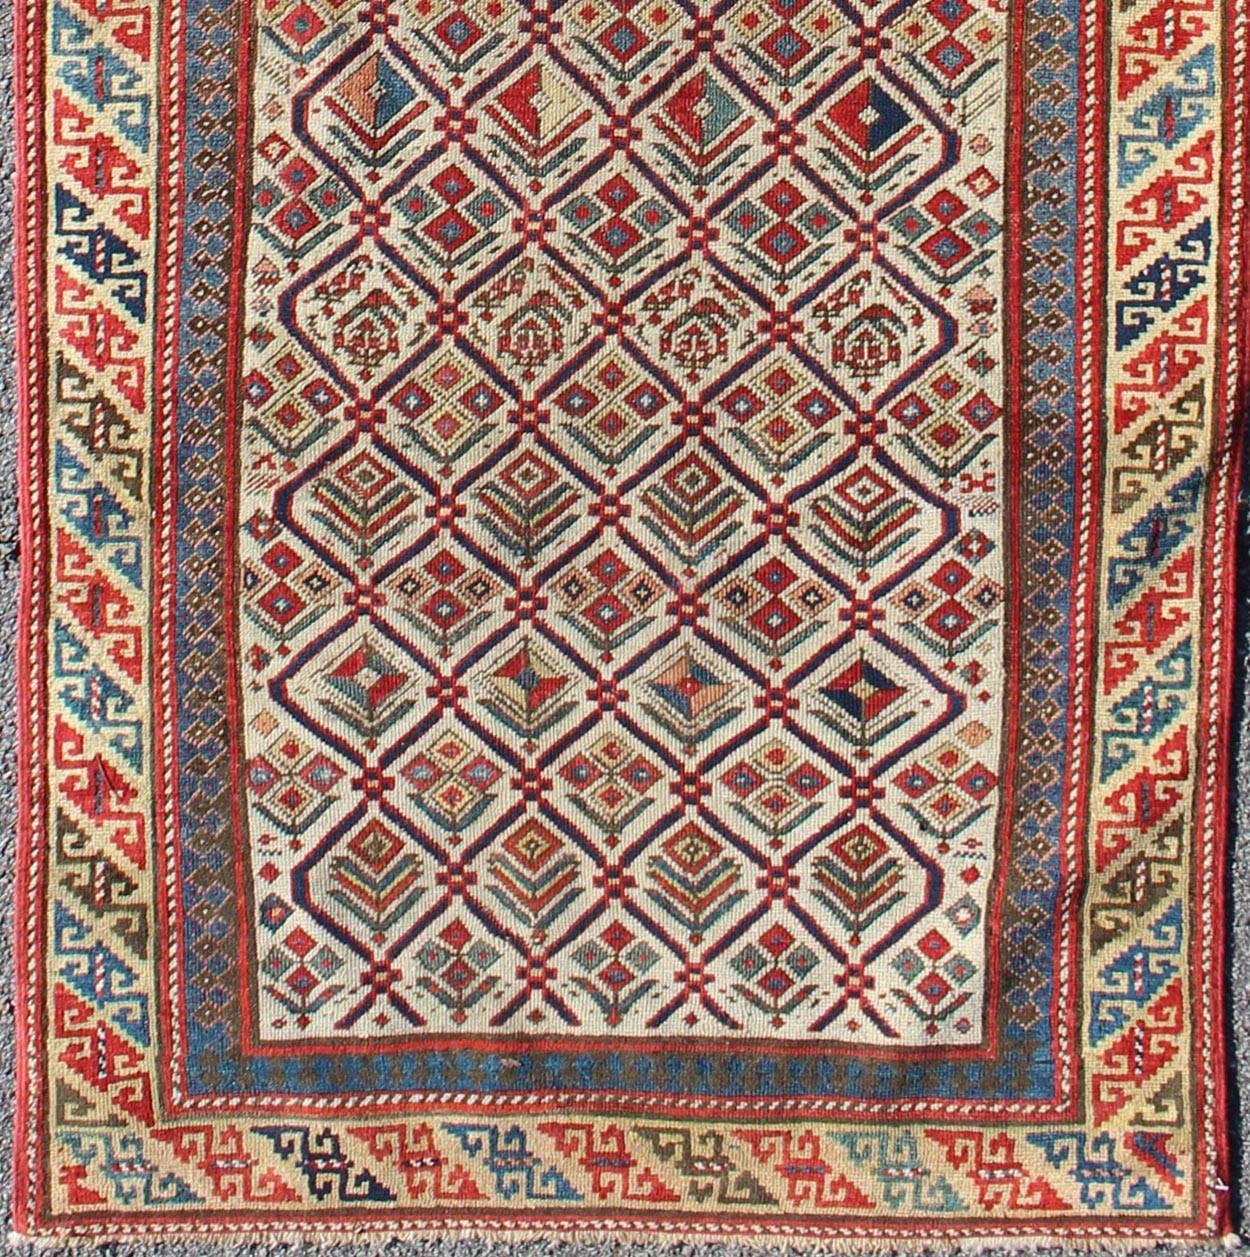 Antique Caucasian Shirvan Runner with Diamond Design in Ivory Background. Keivan Woven Arts / rug 11-91002, country of origin / type: Caucus / Caucasian, circa 1870.
Measures: 3'2 x 9'11
This beautiful Antique Shirvan runner was woven in the